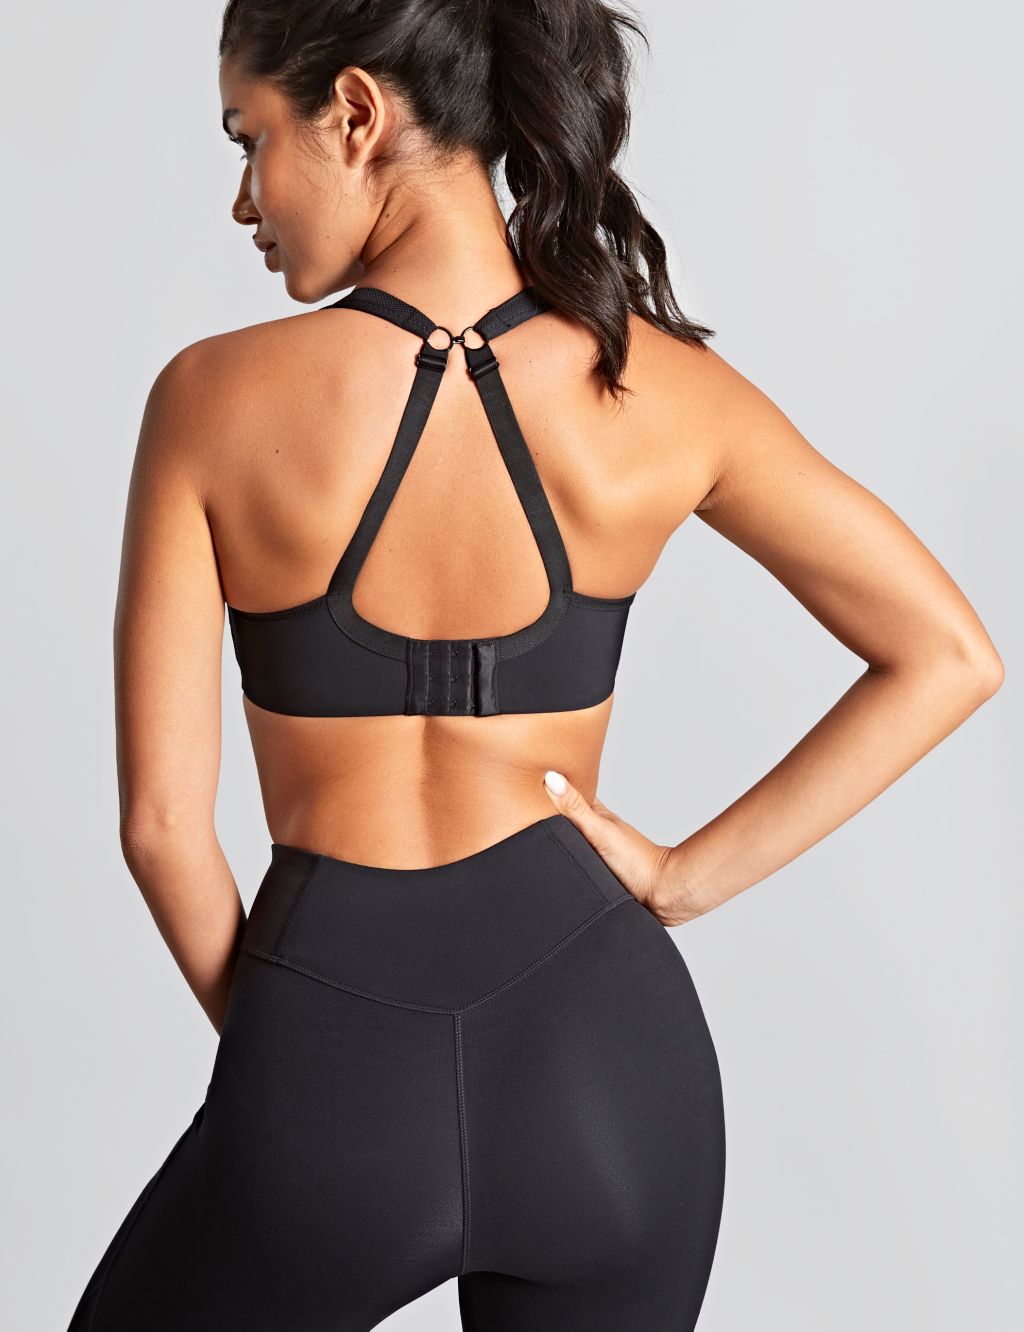 Ultimate Support Wired Sports Bra D-J image 3